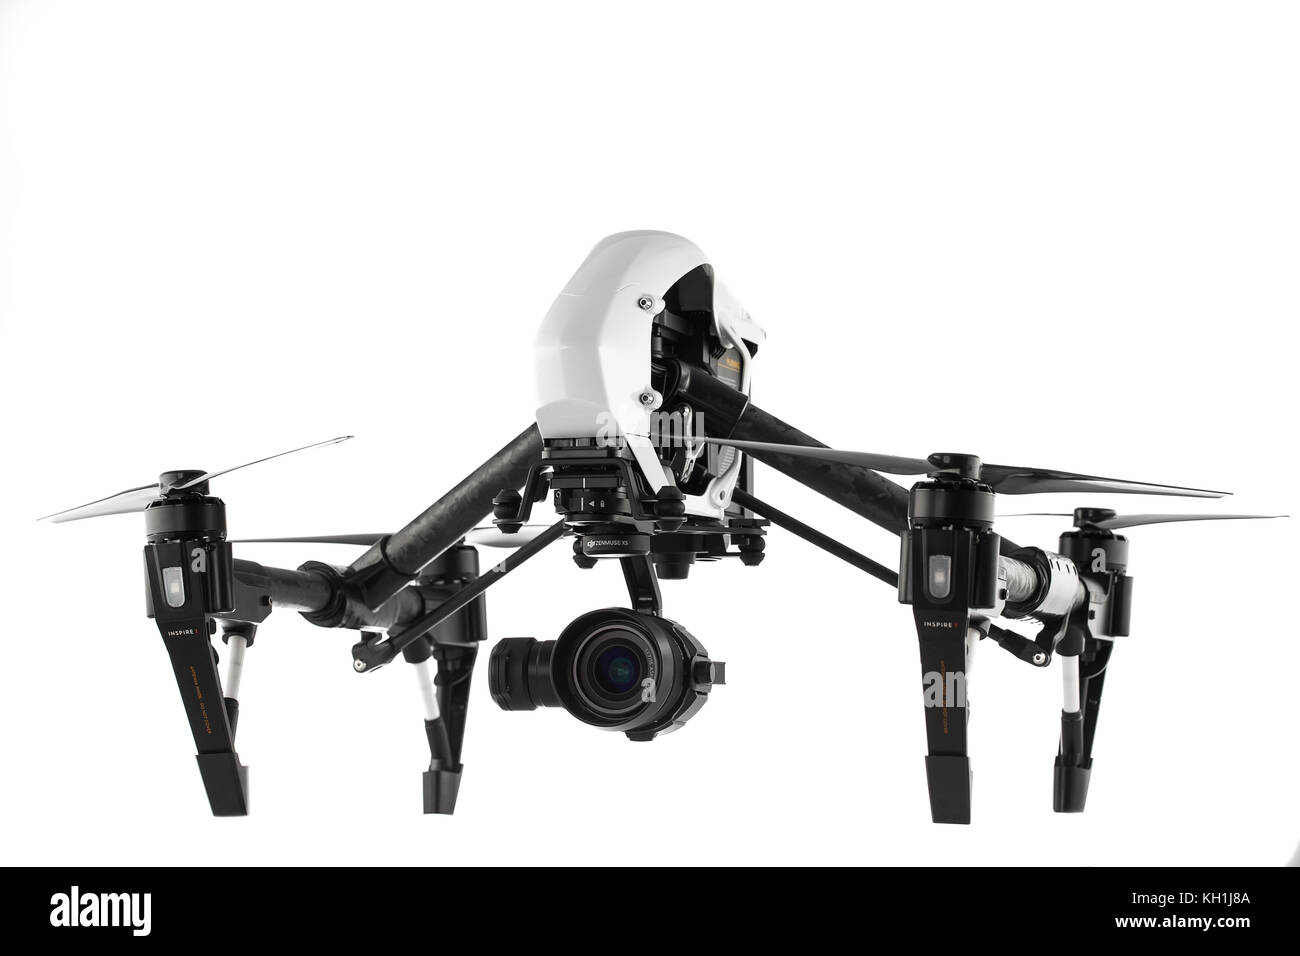 Varna, Bulgaria - April 22 ,2016: Image of DJI Inspire 1 Pro drone UAV quadcopter which shoots 4k video and 16mp still images  and is controlled by wi Stock Photo